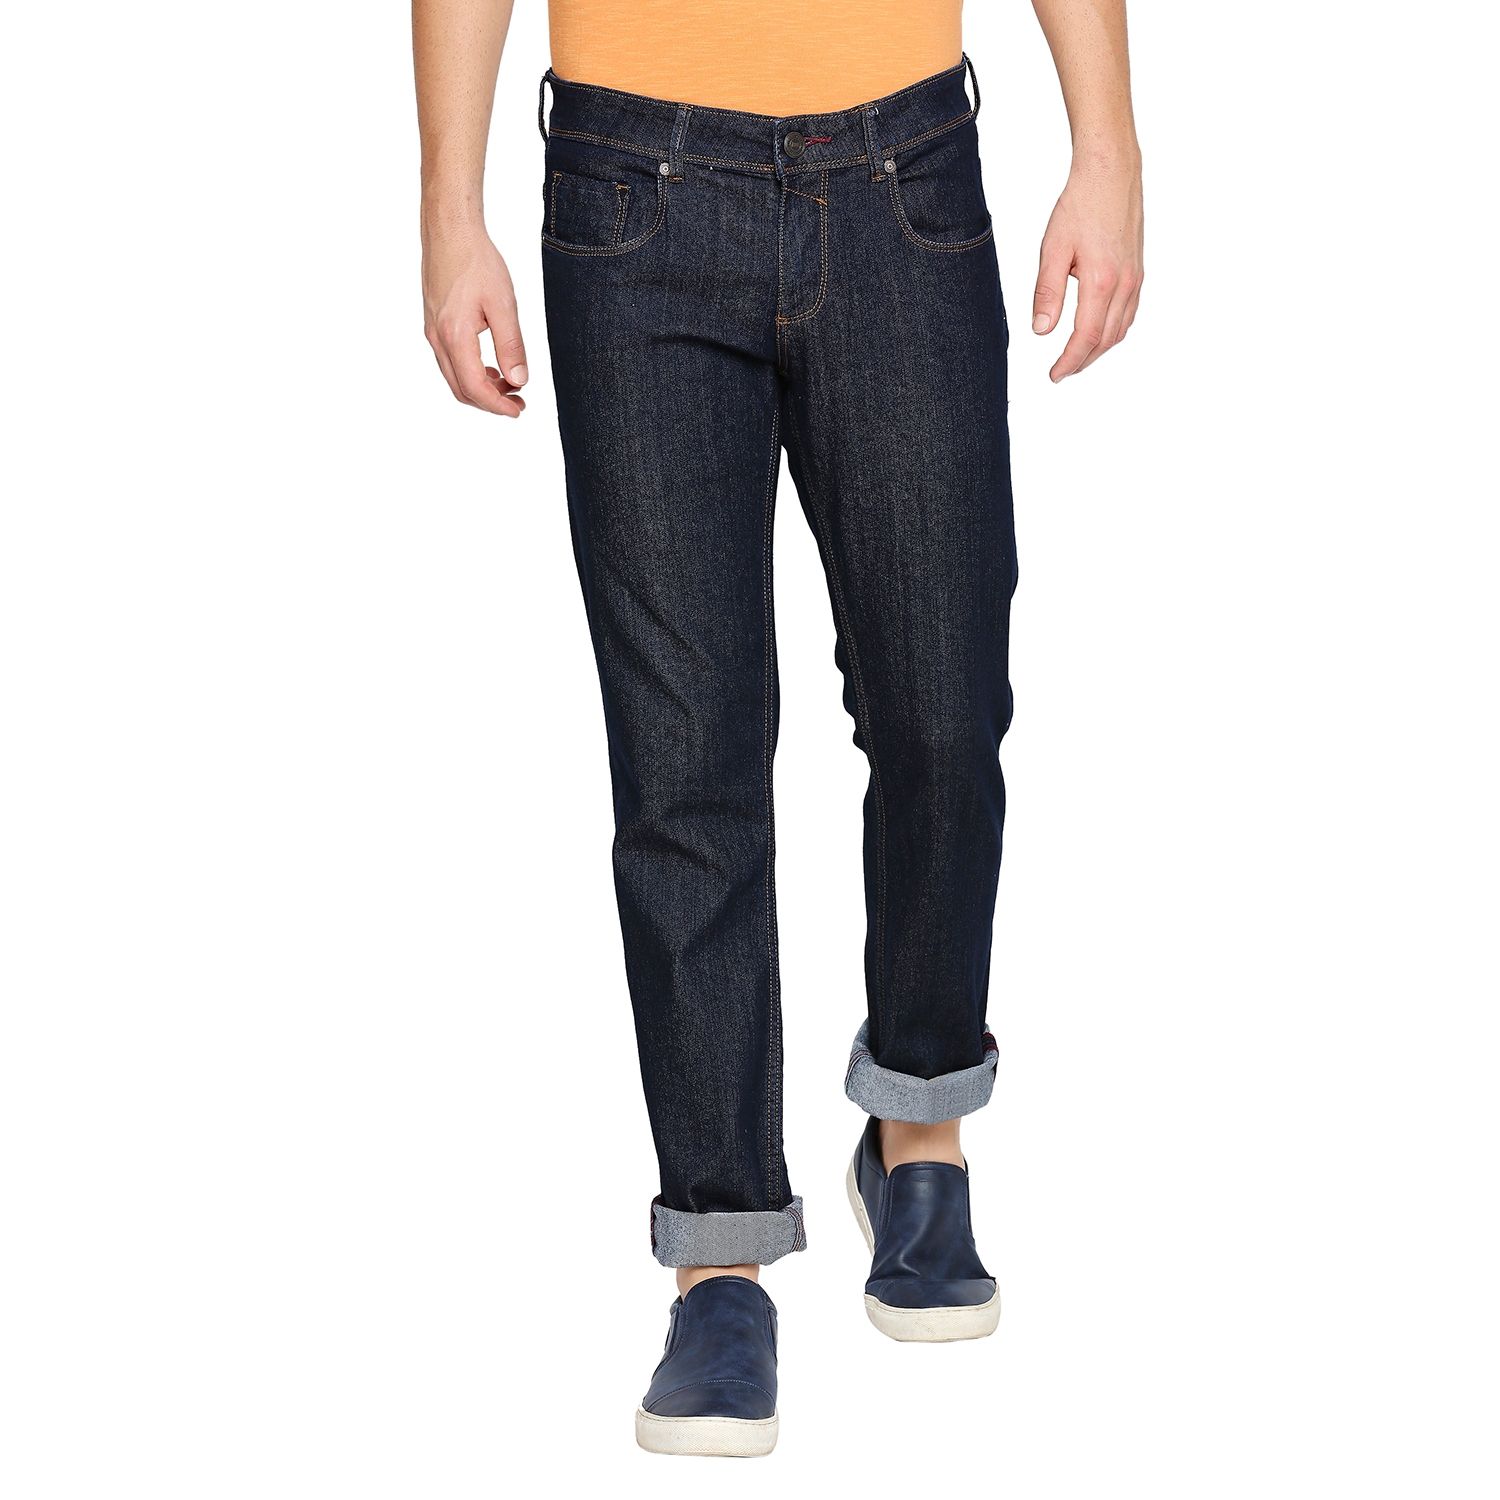 BASICS CASUAL PLAIN NAVY COTTON POLYESTER STRETCH TORQUE JEANS 